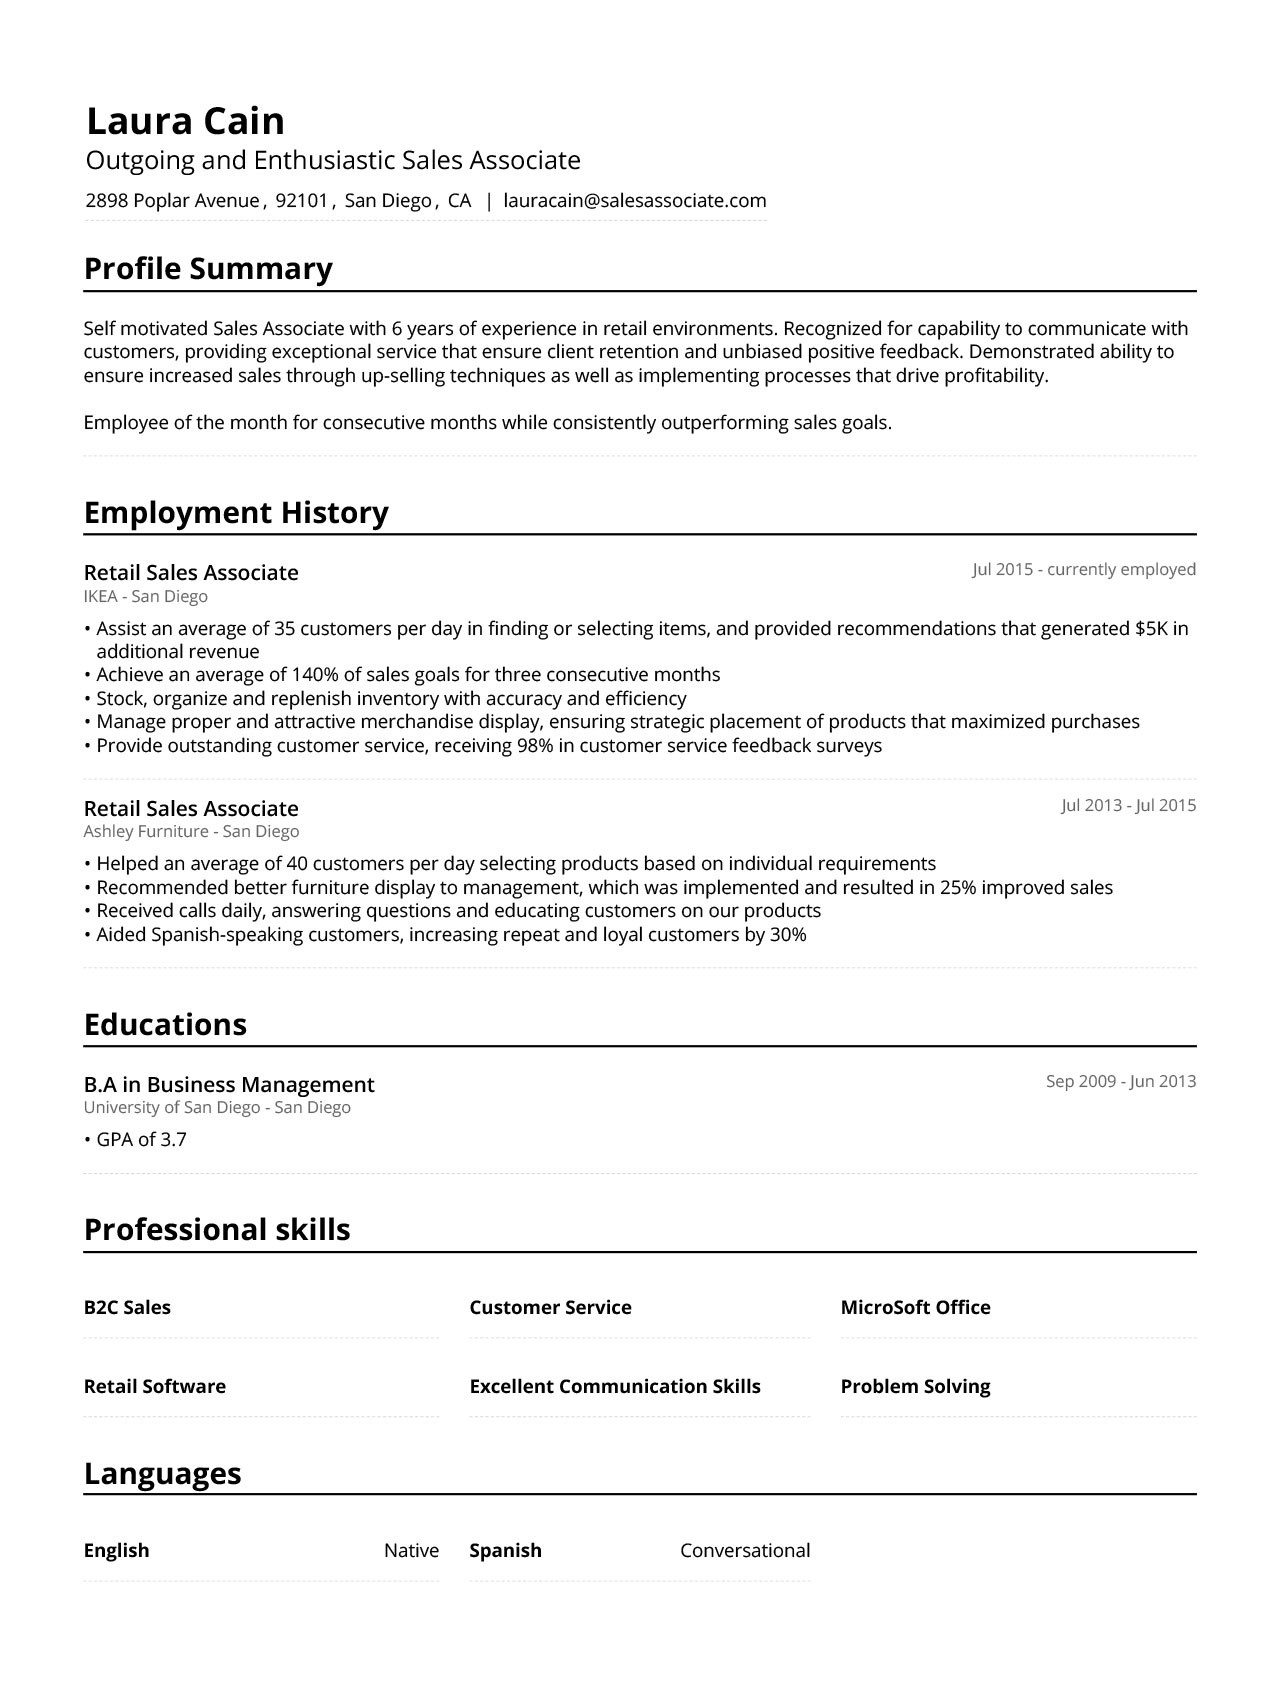 Sample Resume for Furniture Sales Position Sales associate Resume Example & Writing Guide [2021] – Jofibo